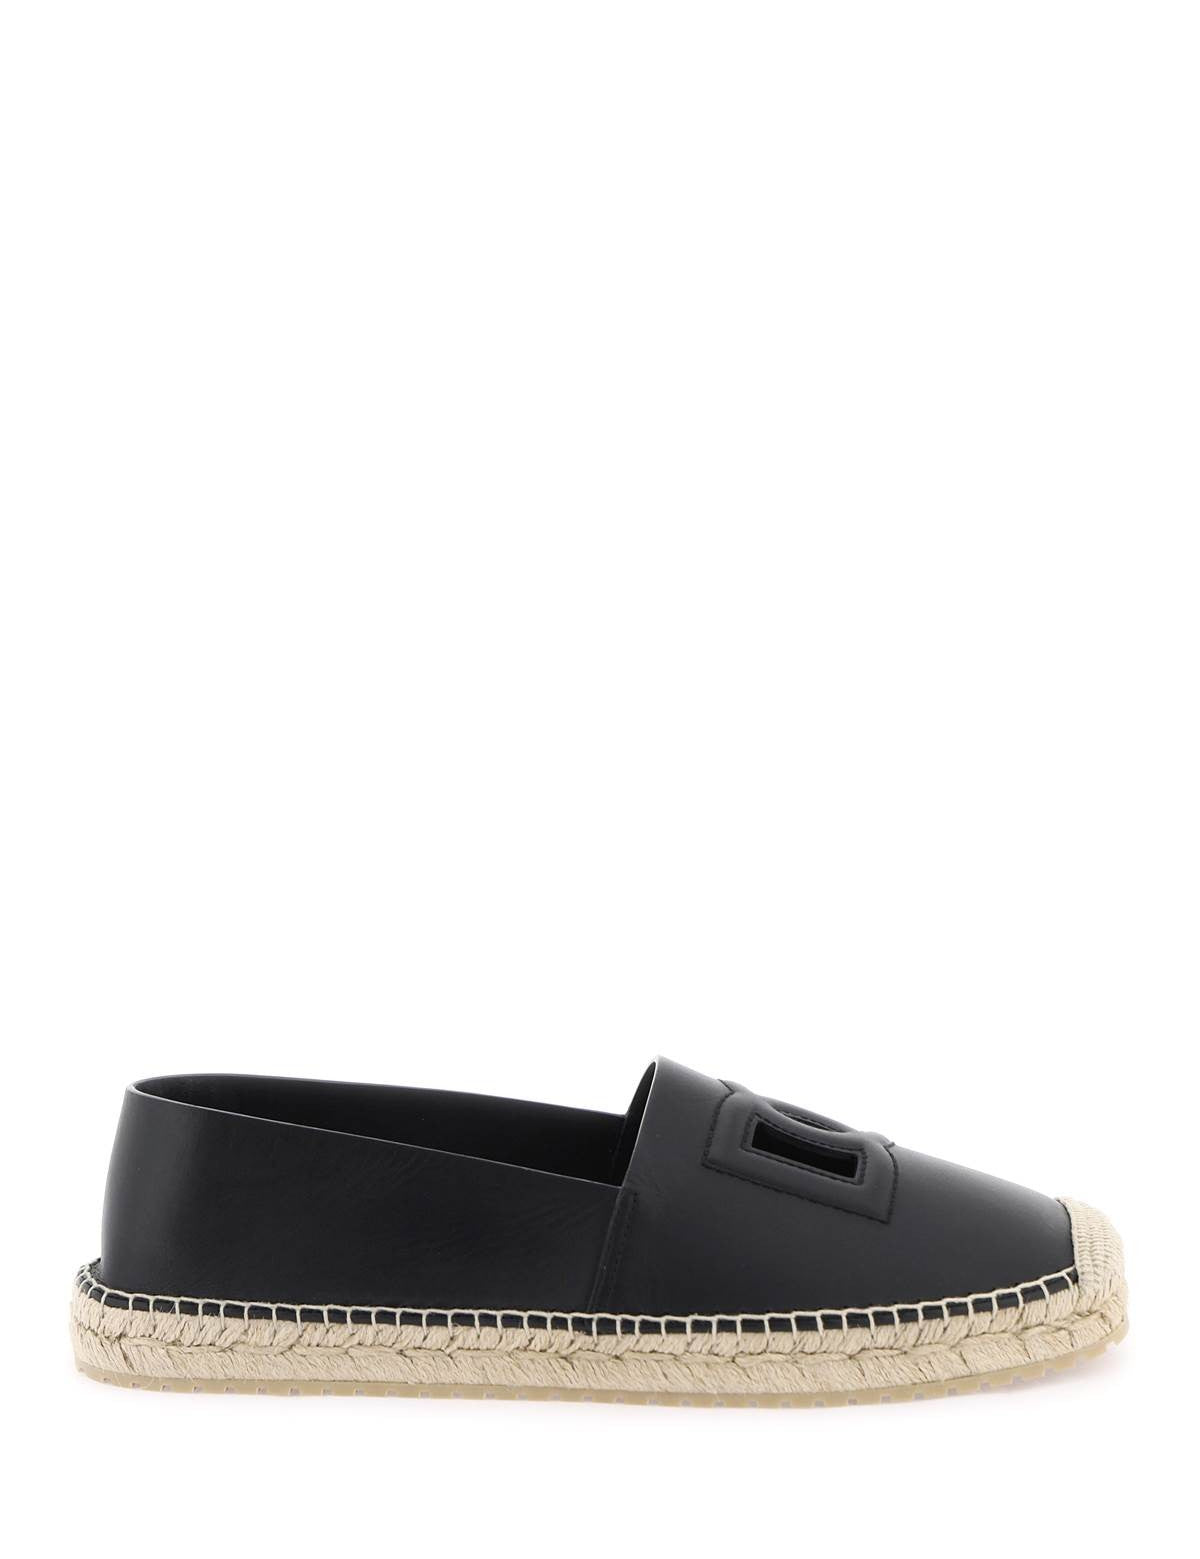 dolce-gabbana-leather-espadrilles-with-dg-logo-and.jpg